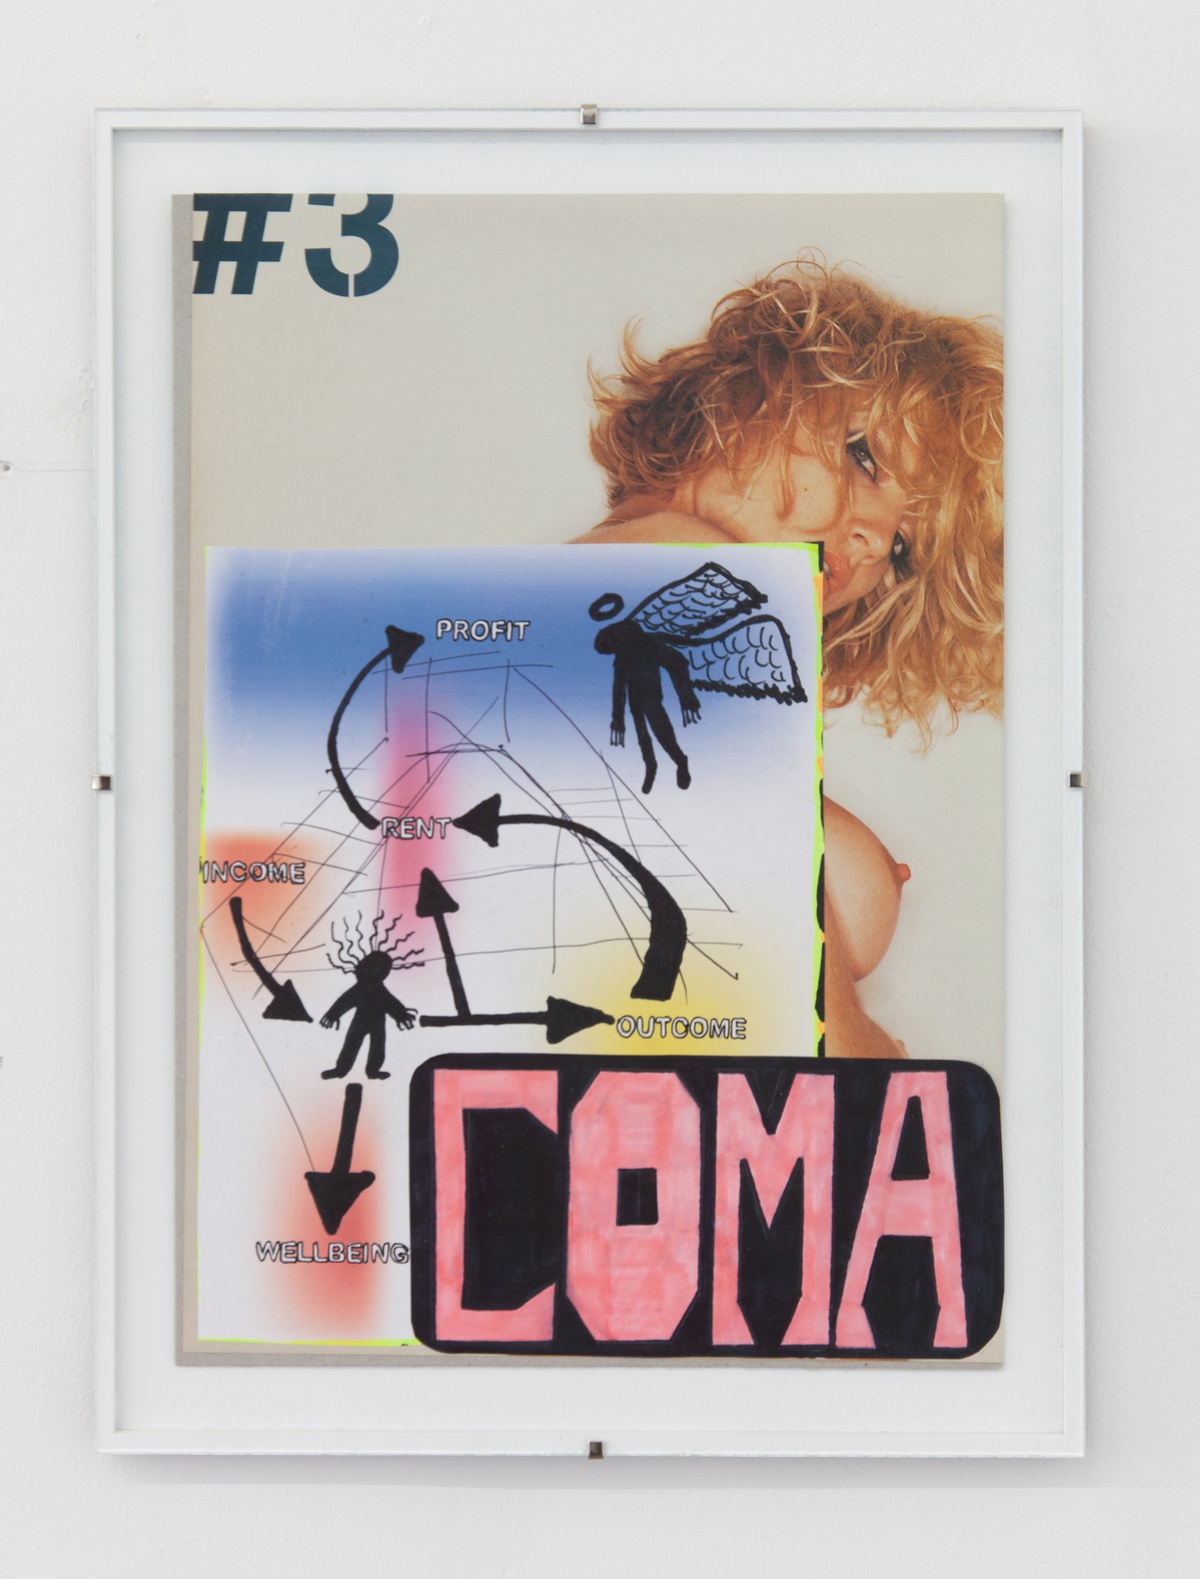 Richard Sides, COMA, 2019card, found printed material, inkjet print, marker, ink, paper, adhesive25 x 34 cm (framed)